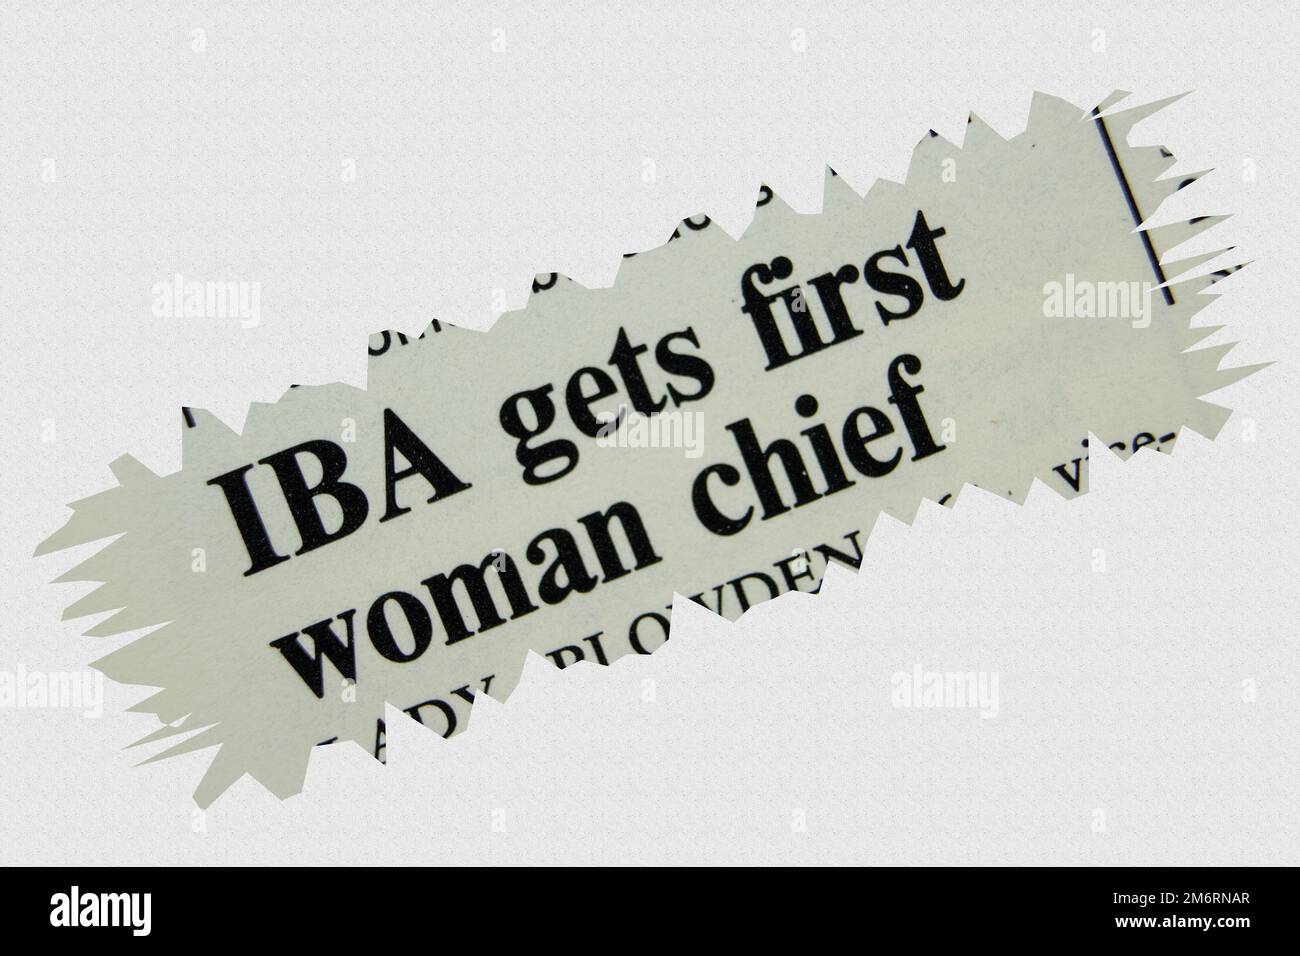 IBA gets first woman chief - news story from 1975 newspaper headline article title with overlay Stock Photo